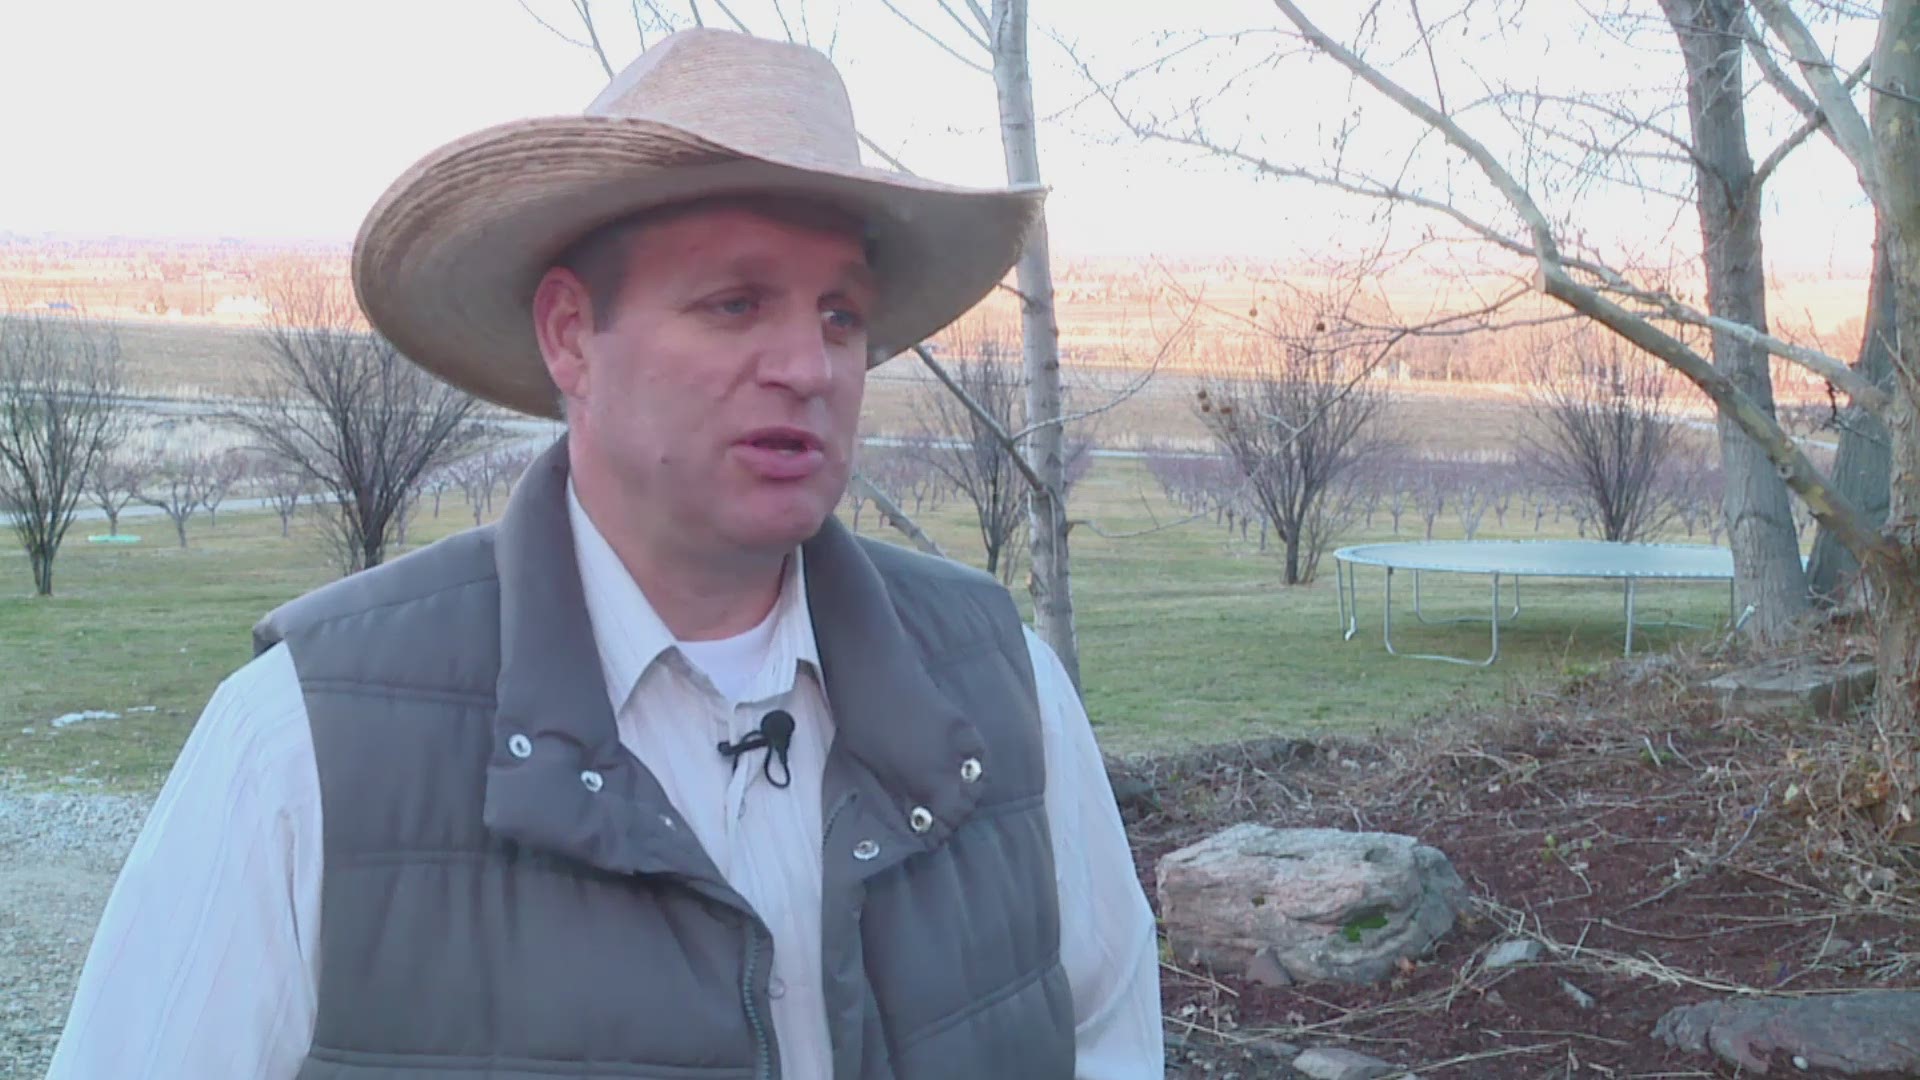 Interview with Ammon Bundy